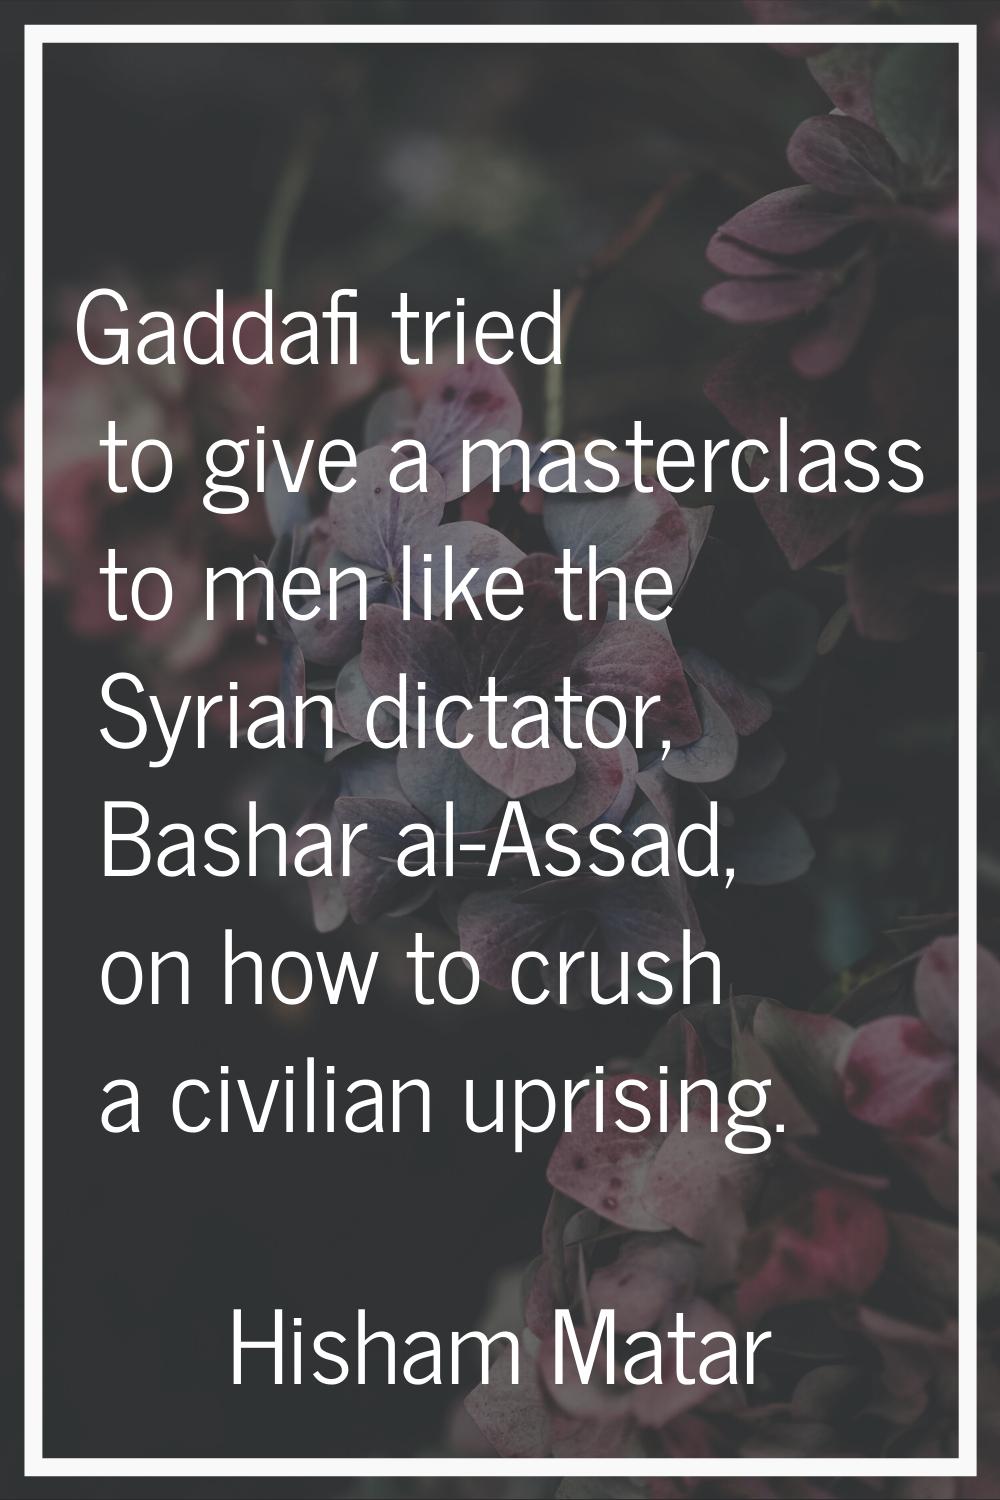 Gaddafi tried to give a masterclass to men like the Syrian dictator, Bashar al-Assad, on how to cru